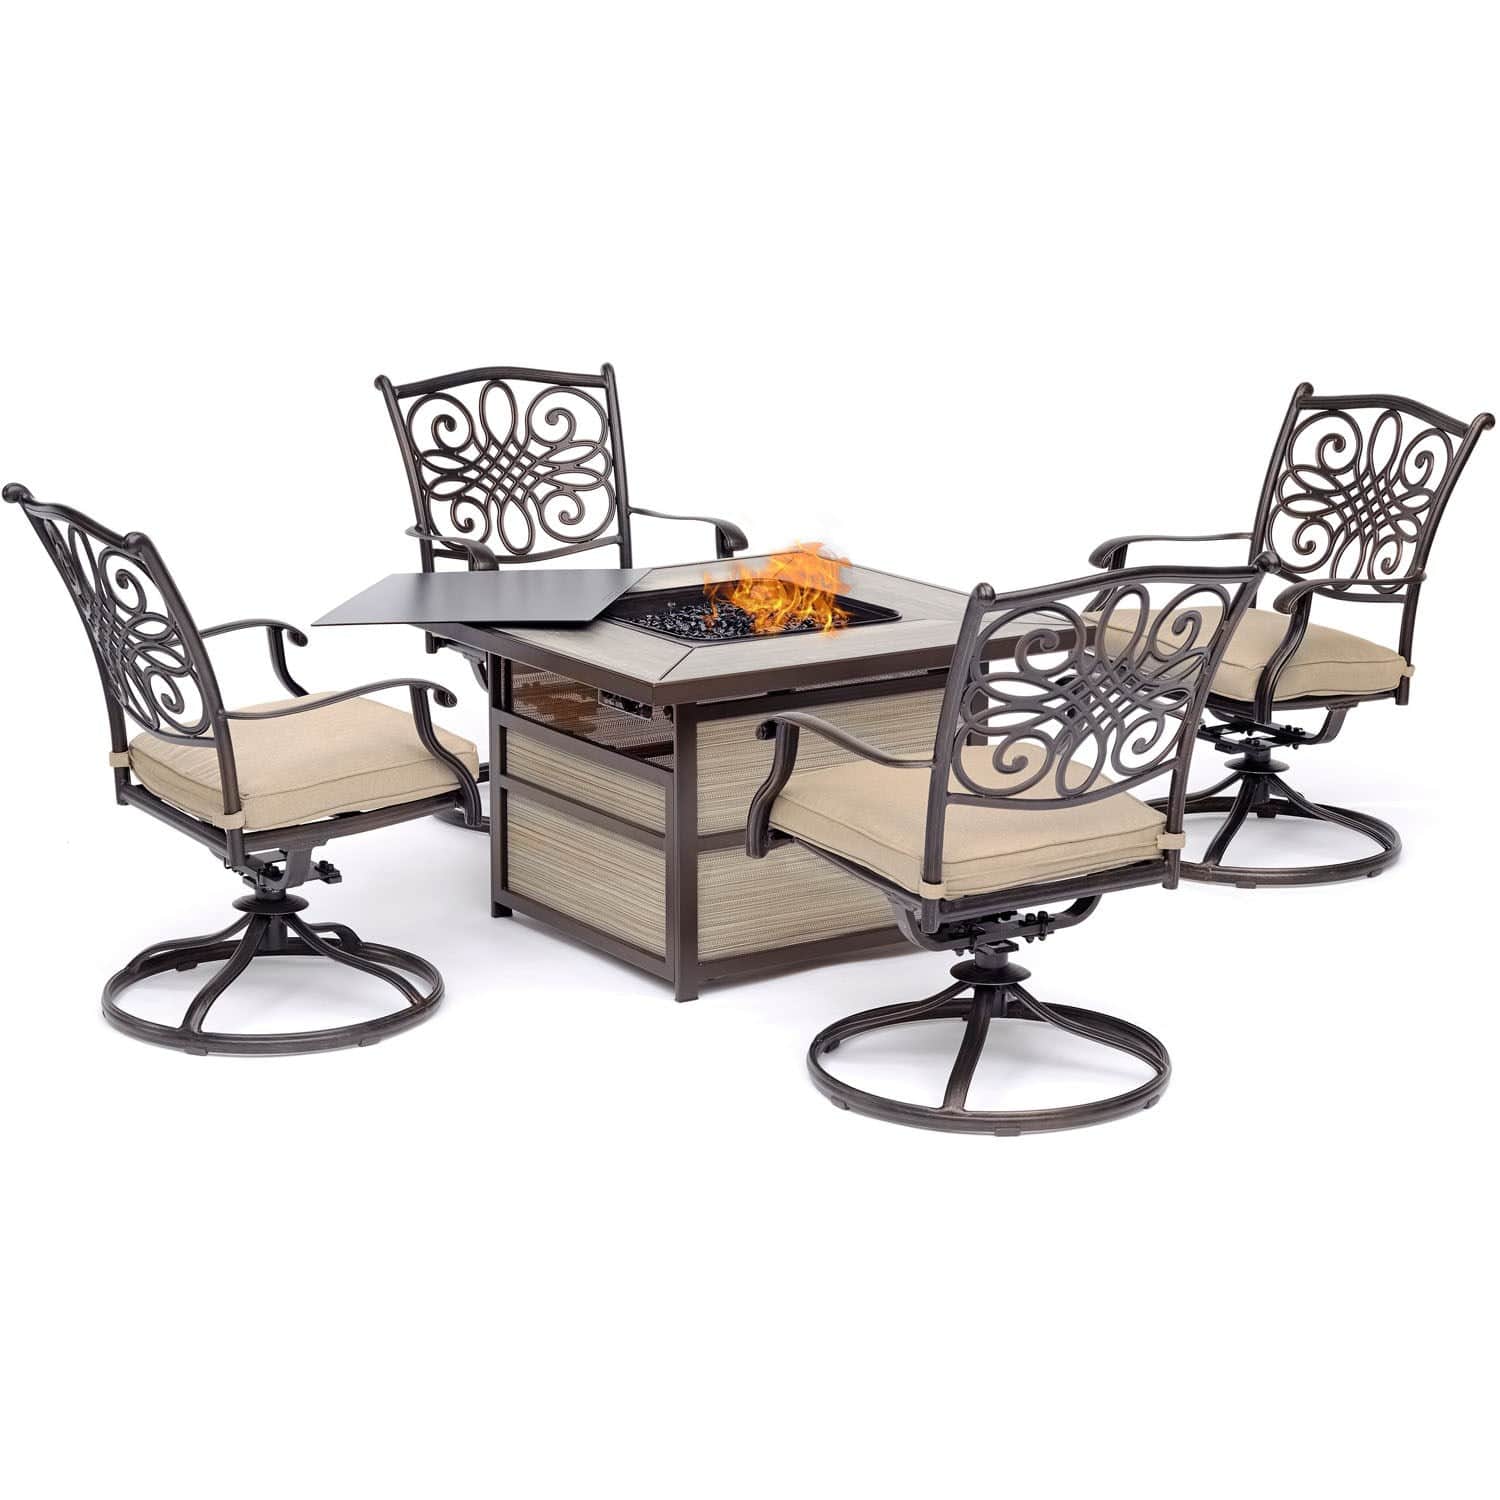 Hanover Fire Pit Chat Set Hanover - Traditions 5-Piece Aluminum Frame Fire Pit Chat Set with 4 Swivel Rockers in Tan with a 40,000 BTU Fire Pit Table | TRAD5PCSQSW4FP-TAN